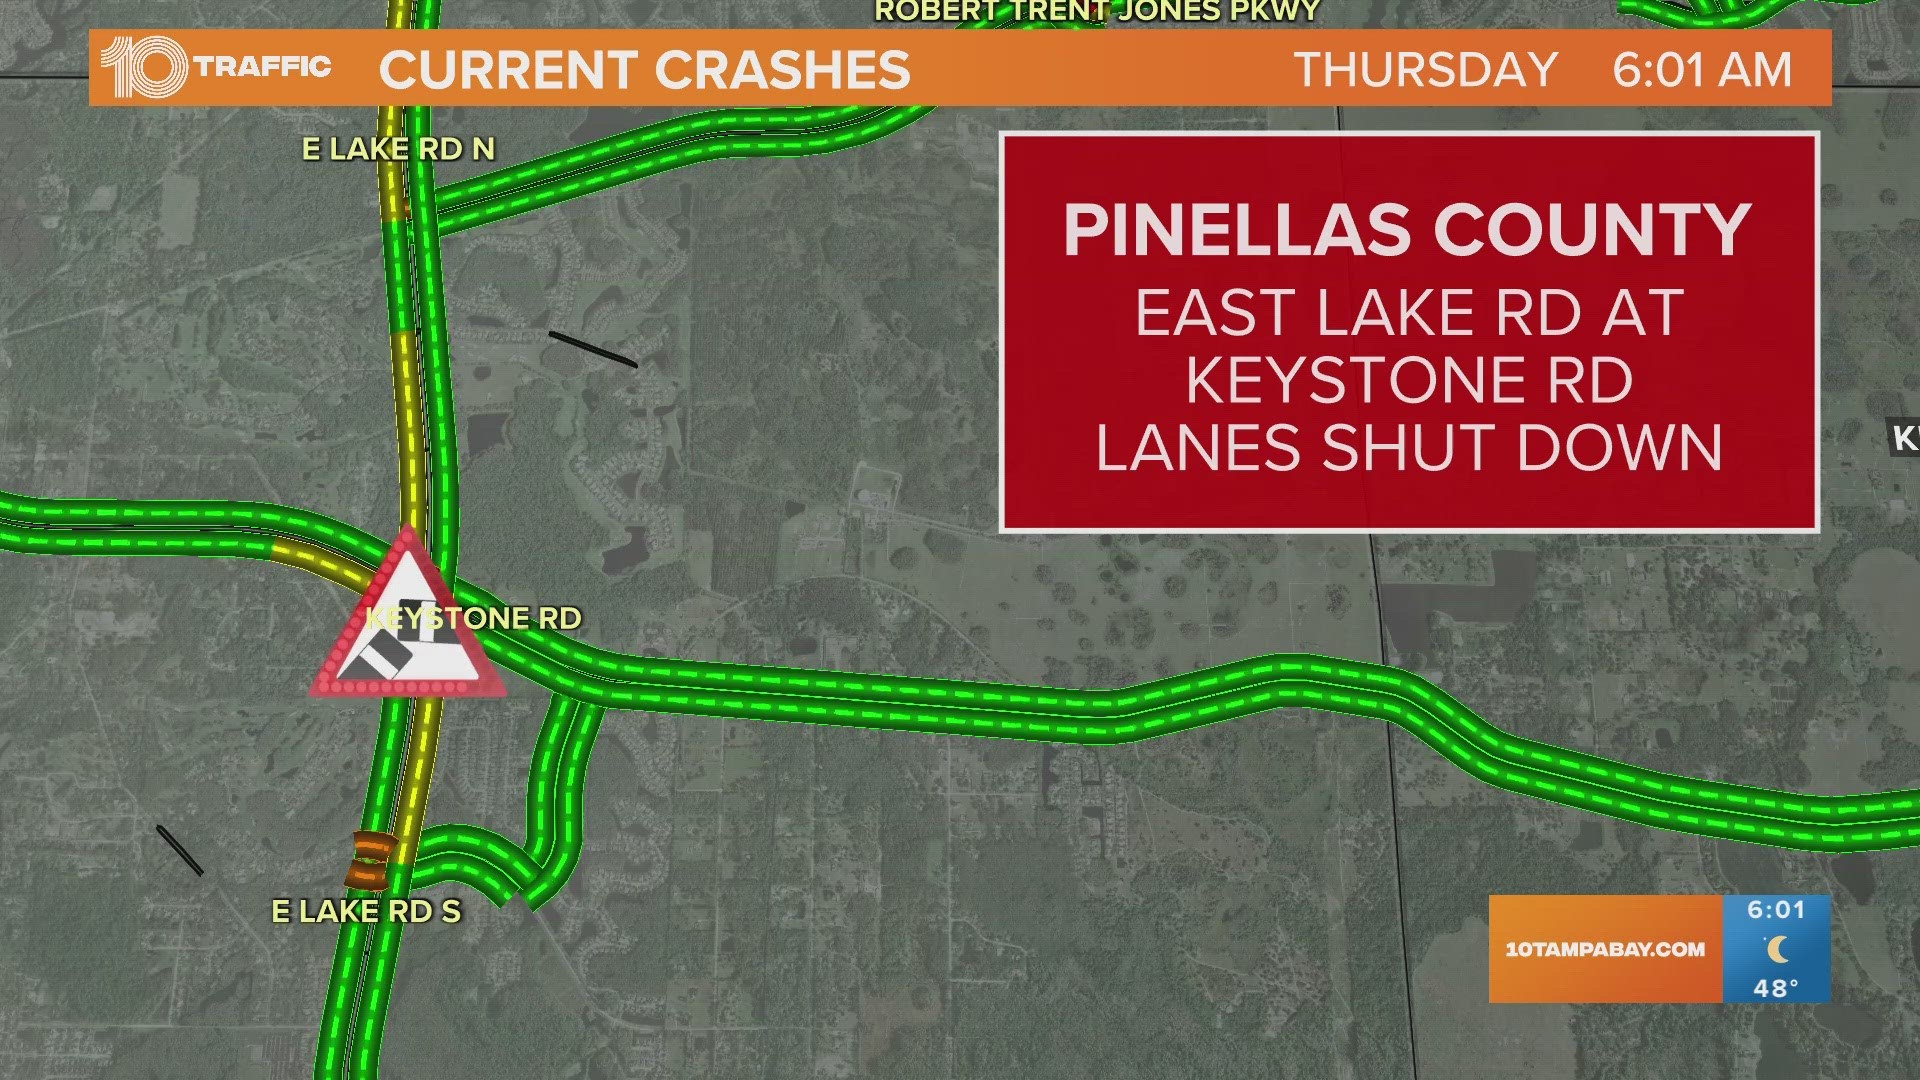 If East Lake Road in Pinellas County is part of your commute, it's a good idea to find an alternate route this morning.